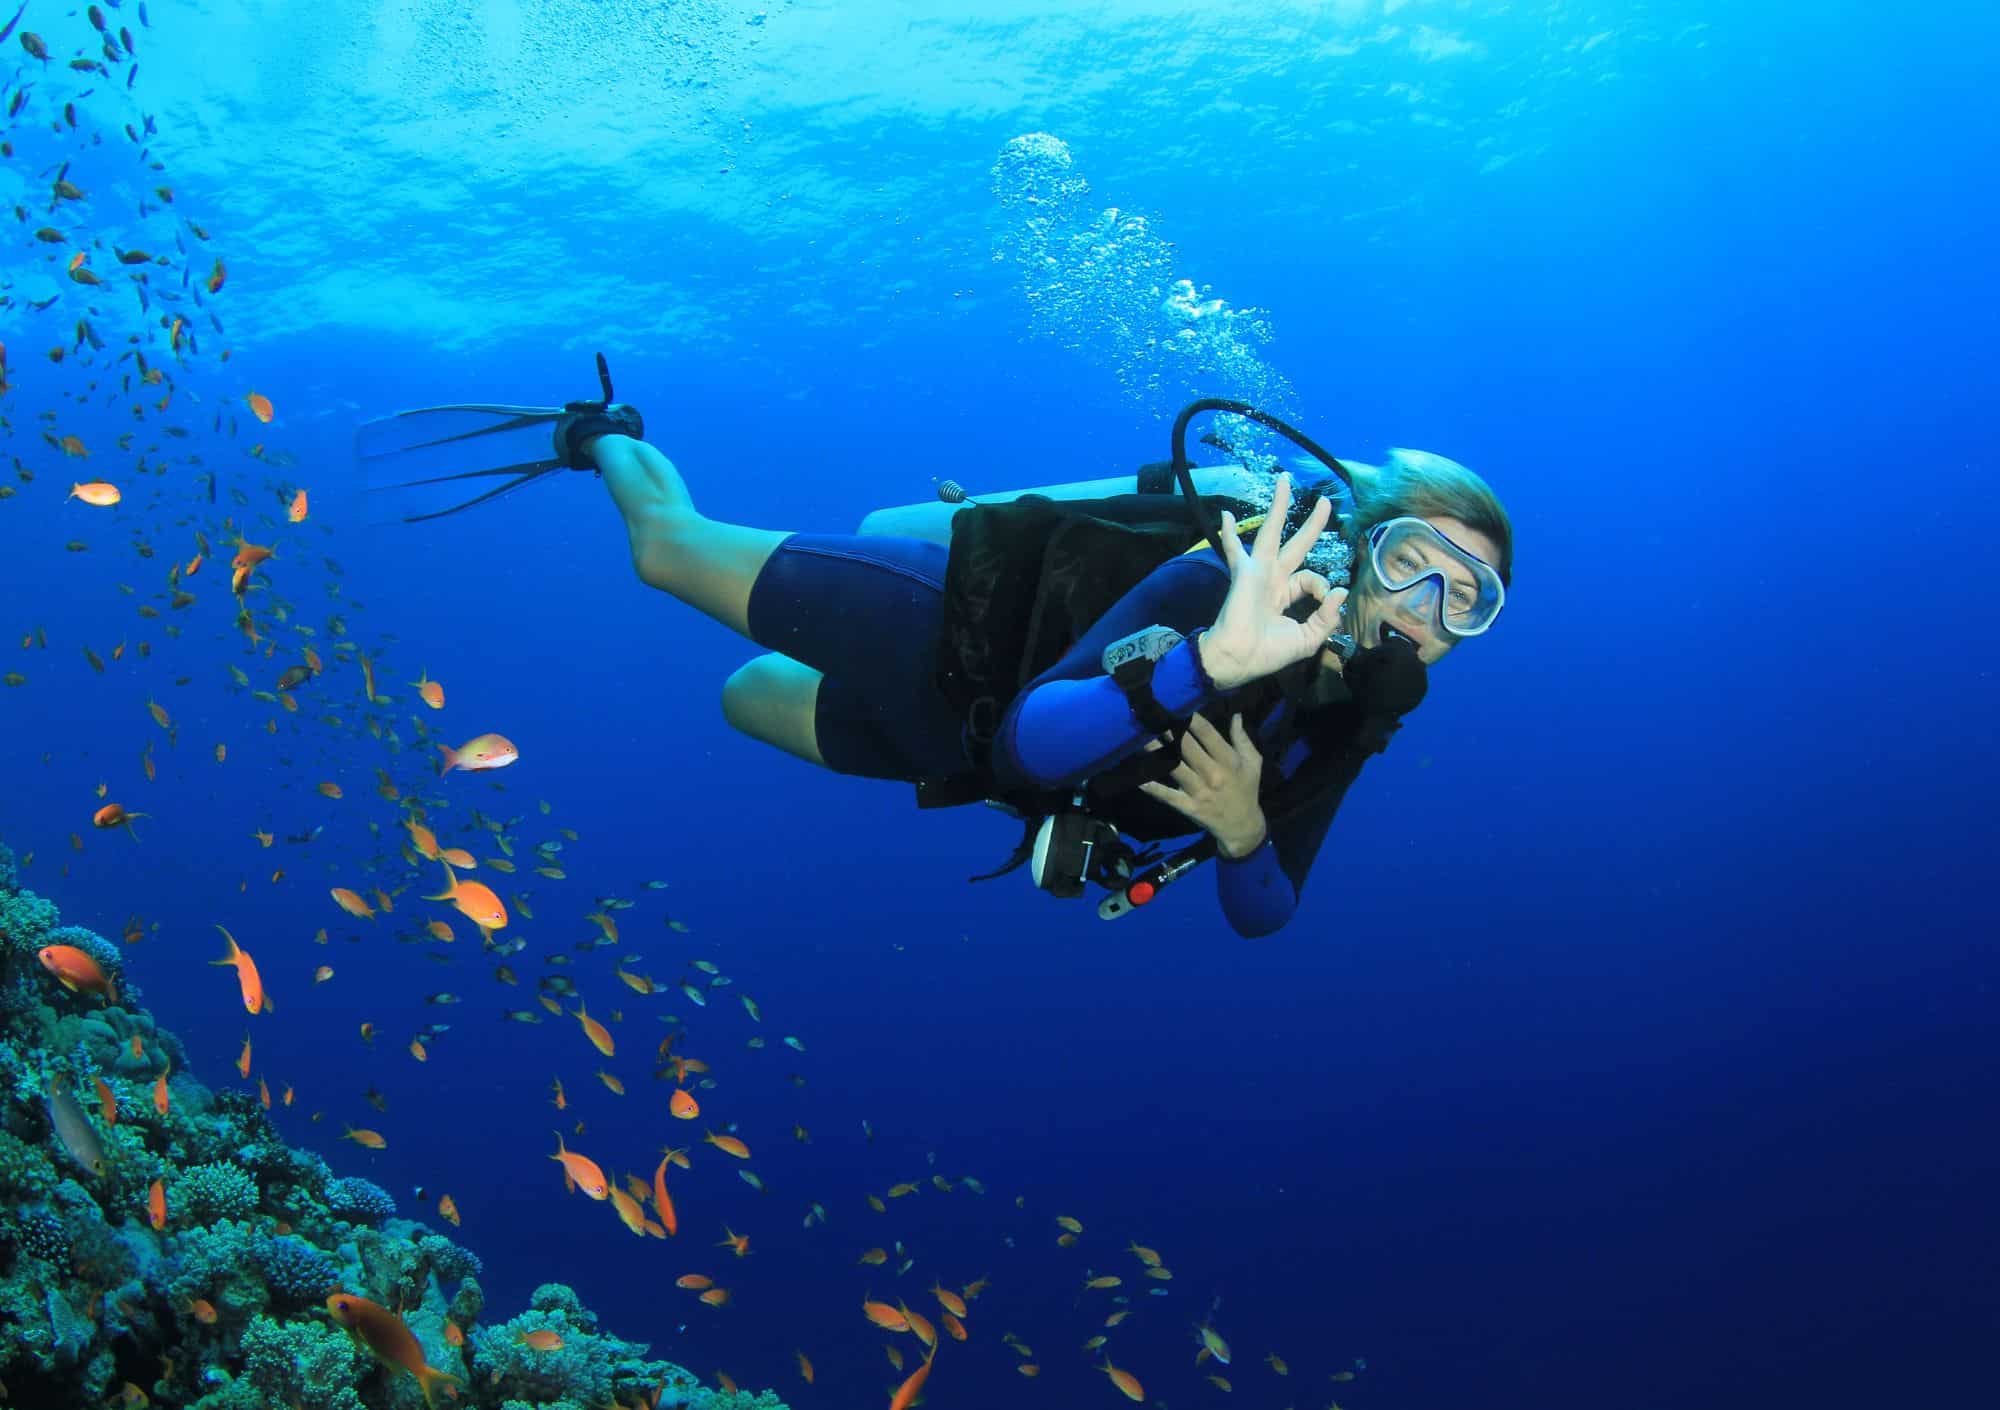 Scuba Diving (3 dives) – half day including equipment and lunch